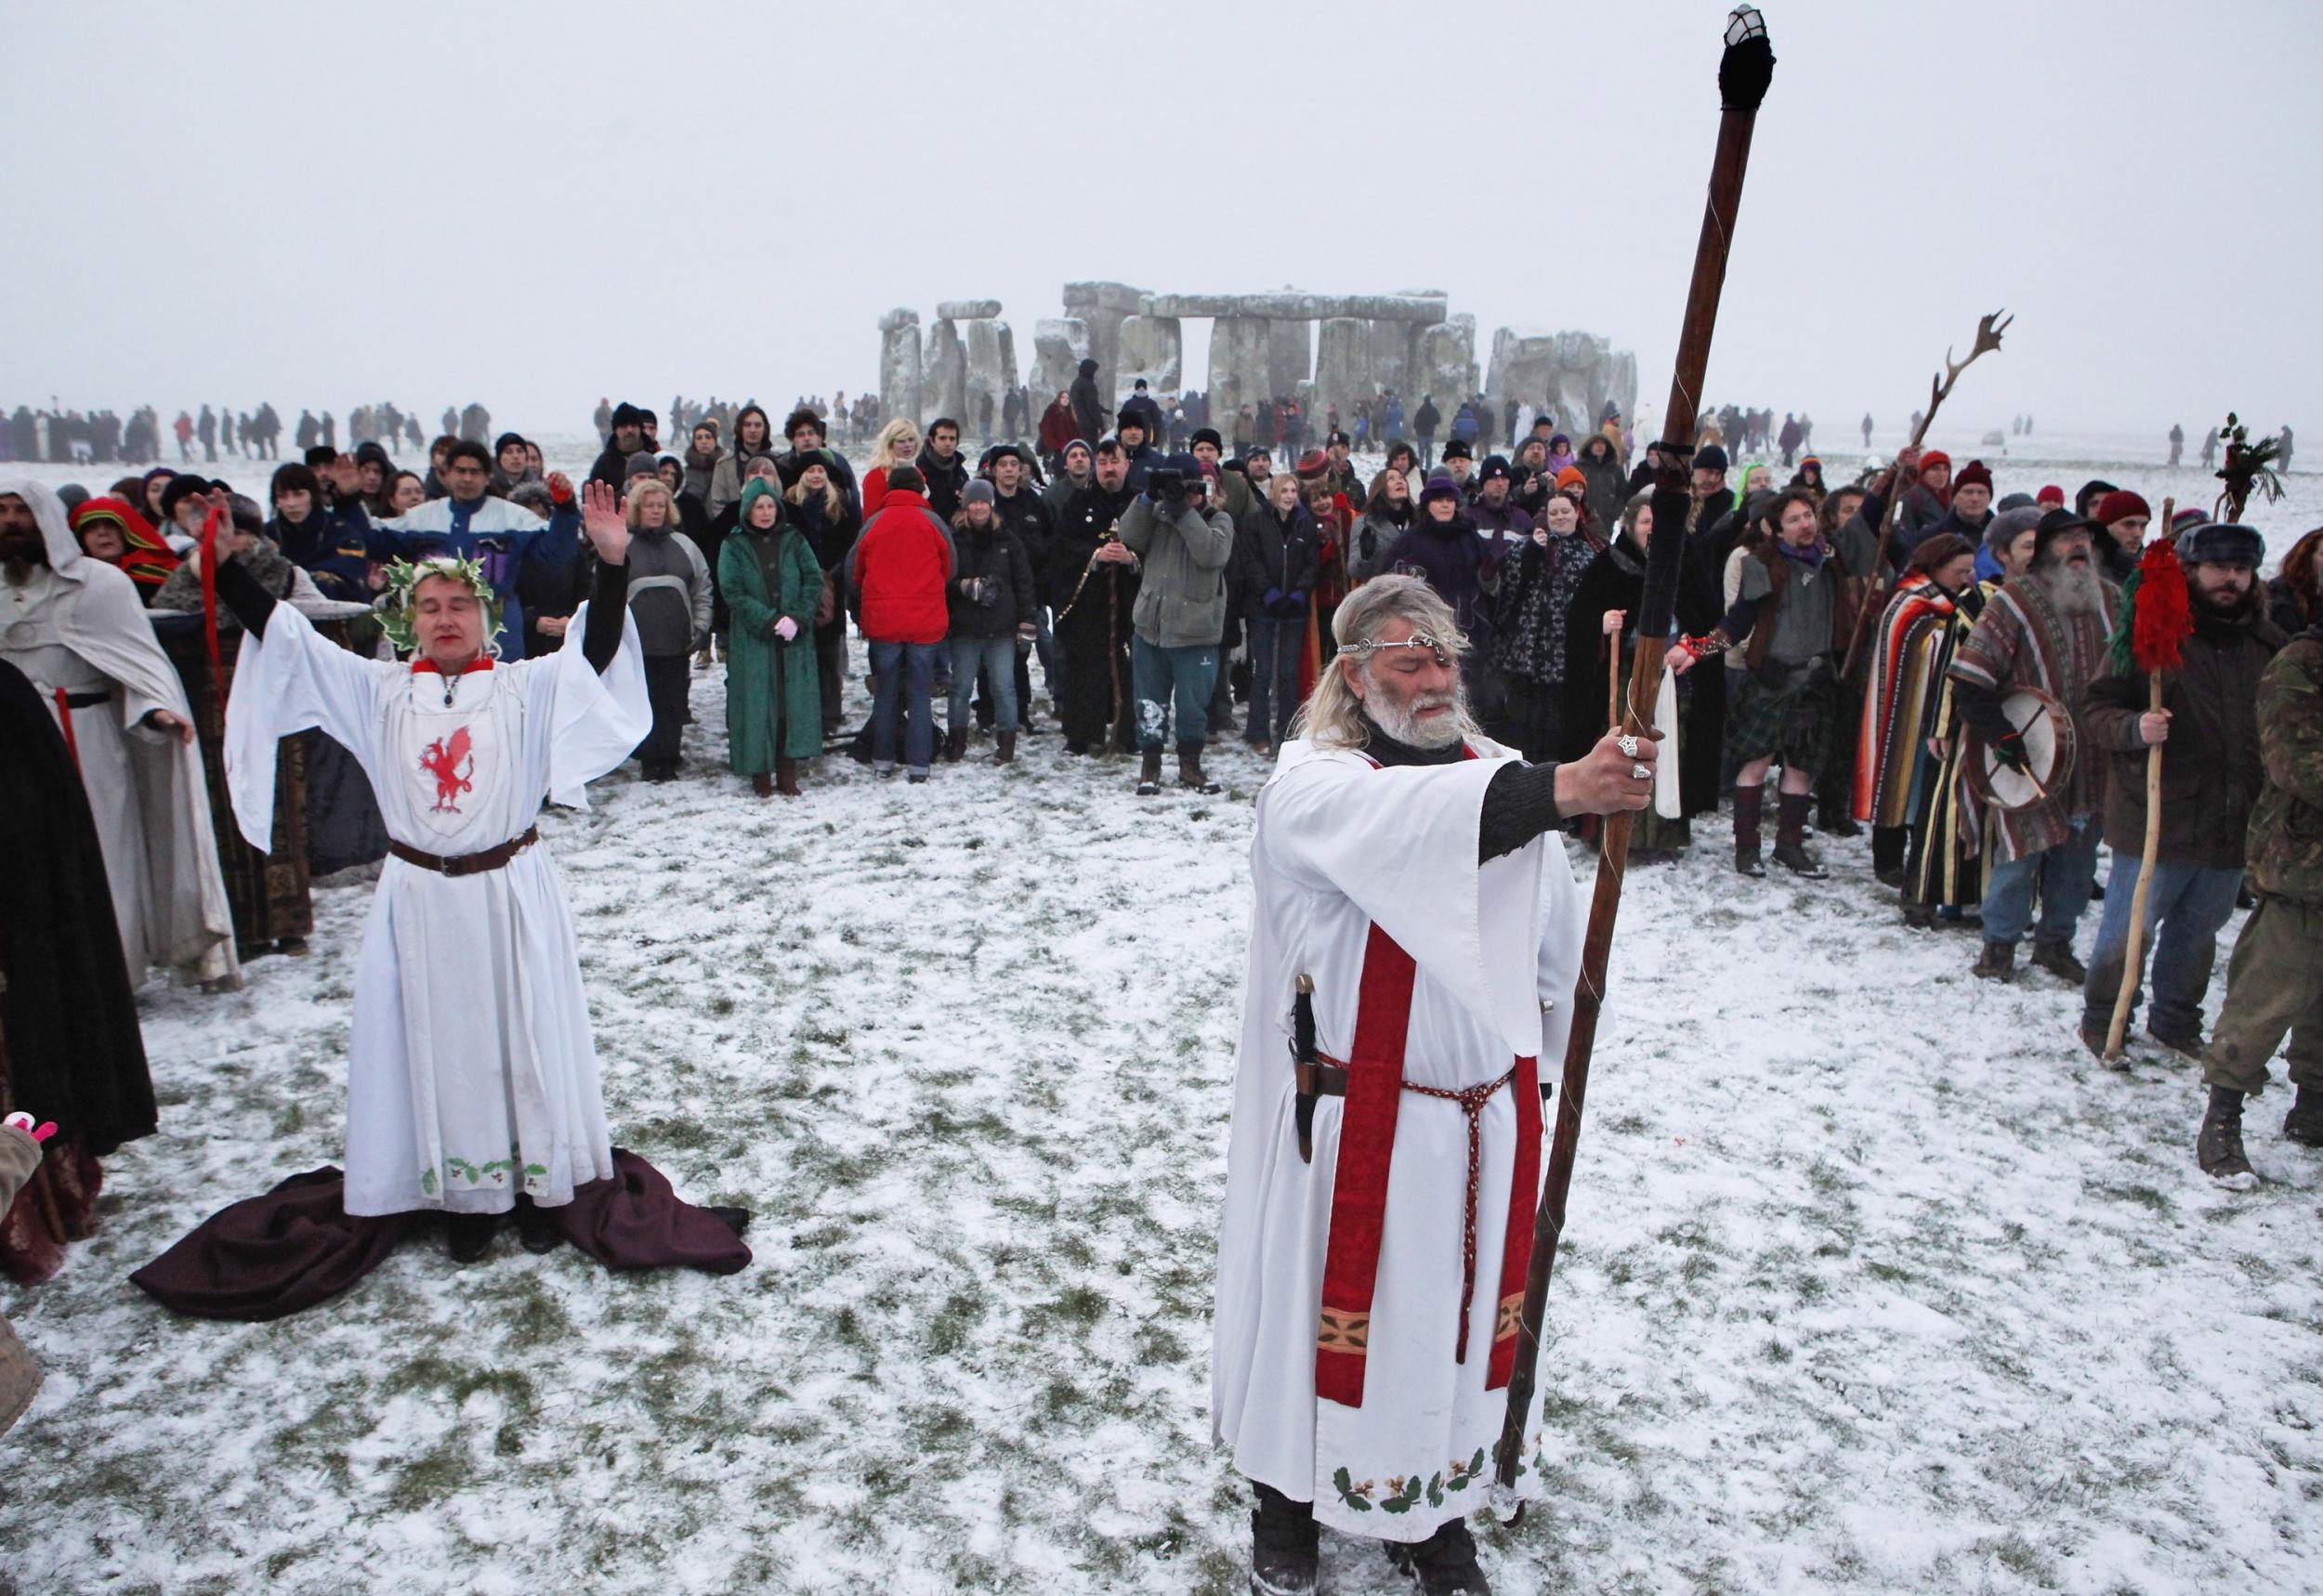 A druid welcomes in the winter solstice at Stonehenge